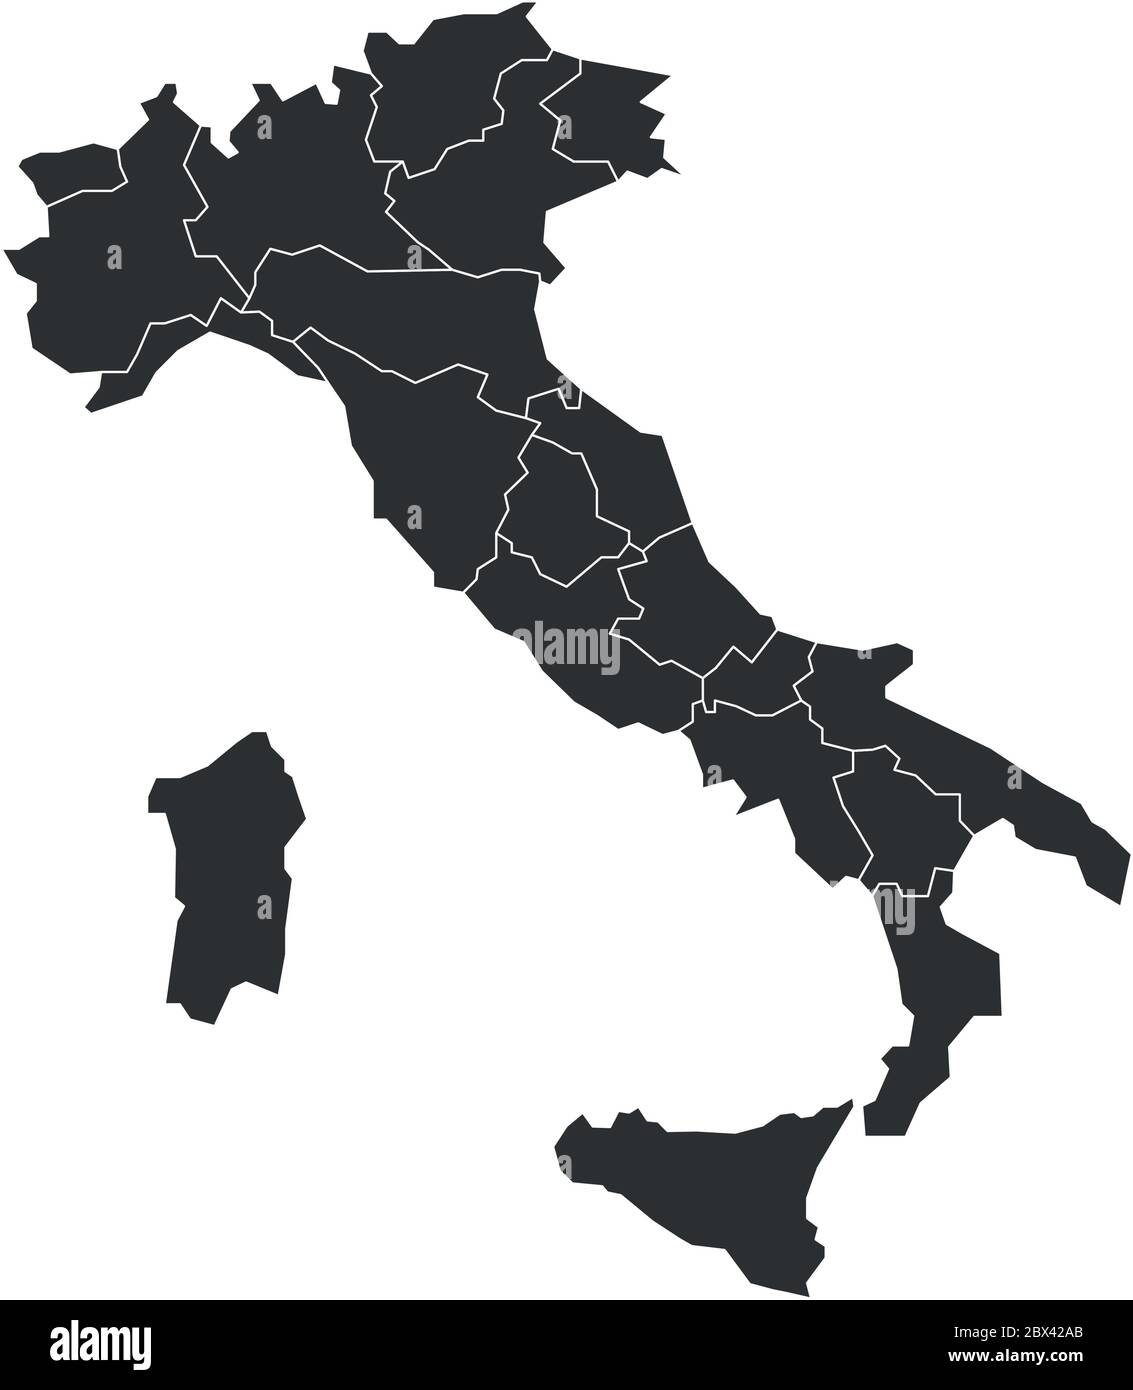 Blank map of Italy divided into 20 administrative regions. Stock Vector